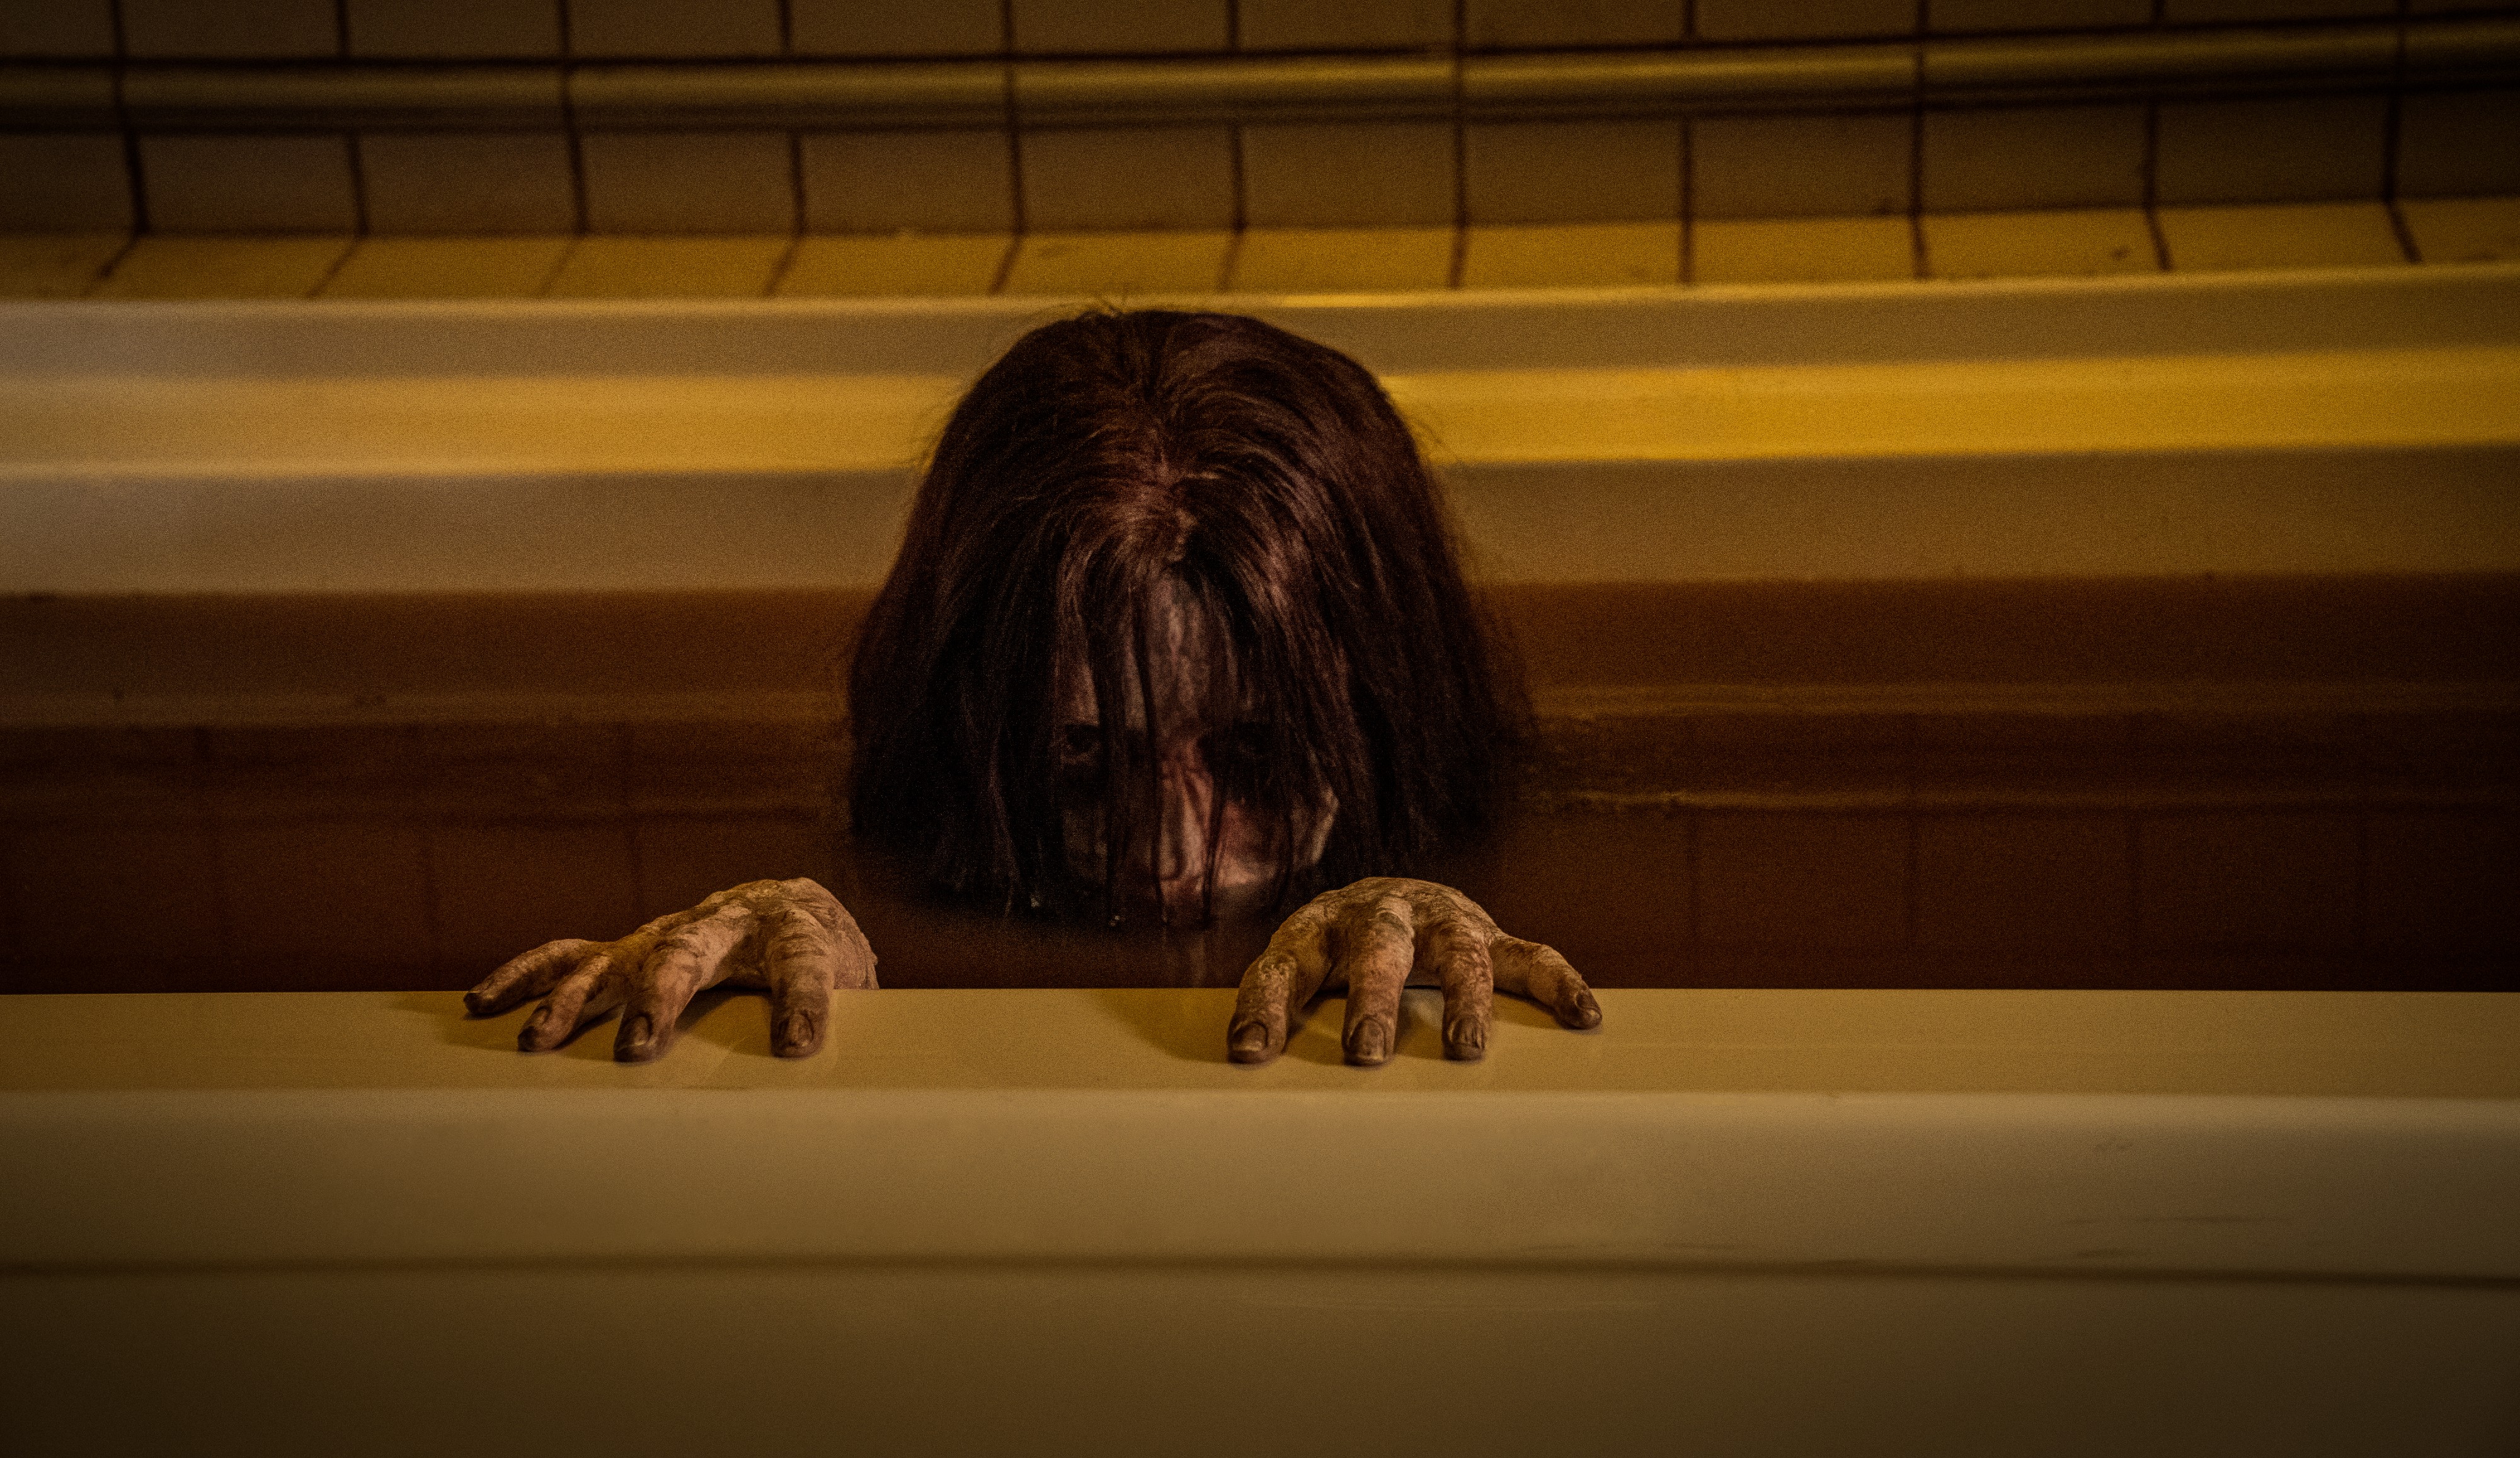 Image from The Grudge